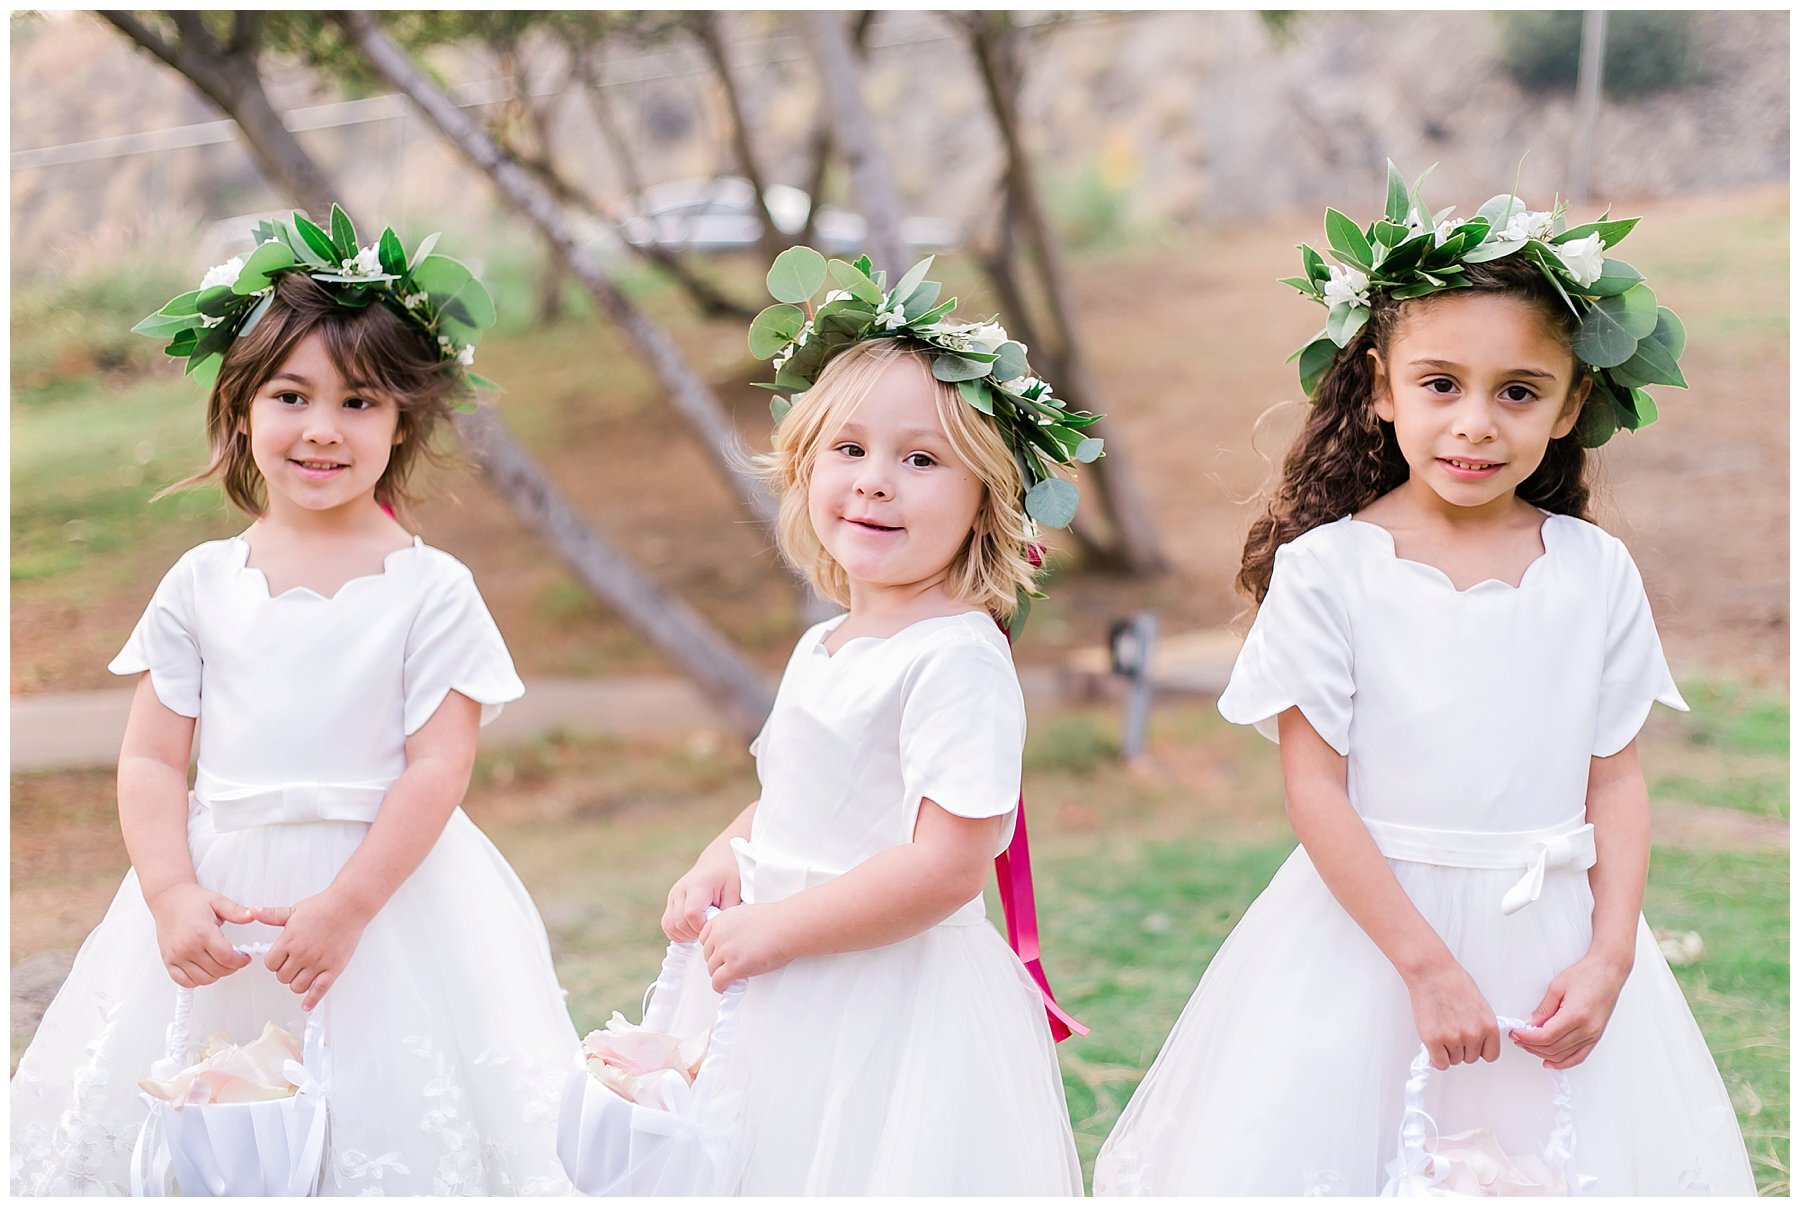  flower girls holding the baskets with the trees behind them 